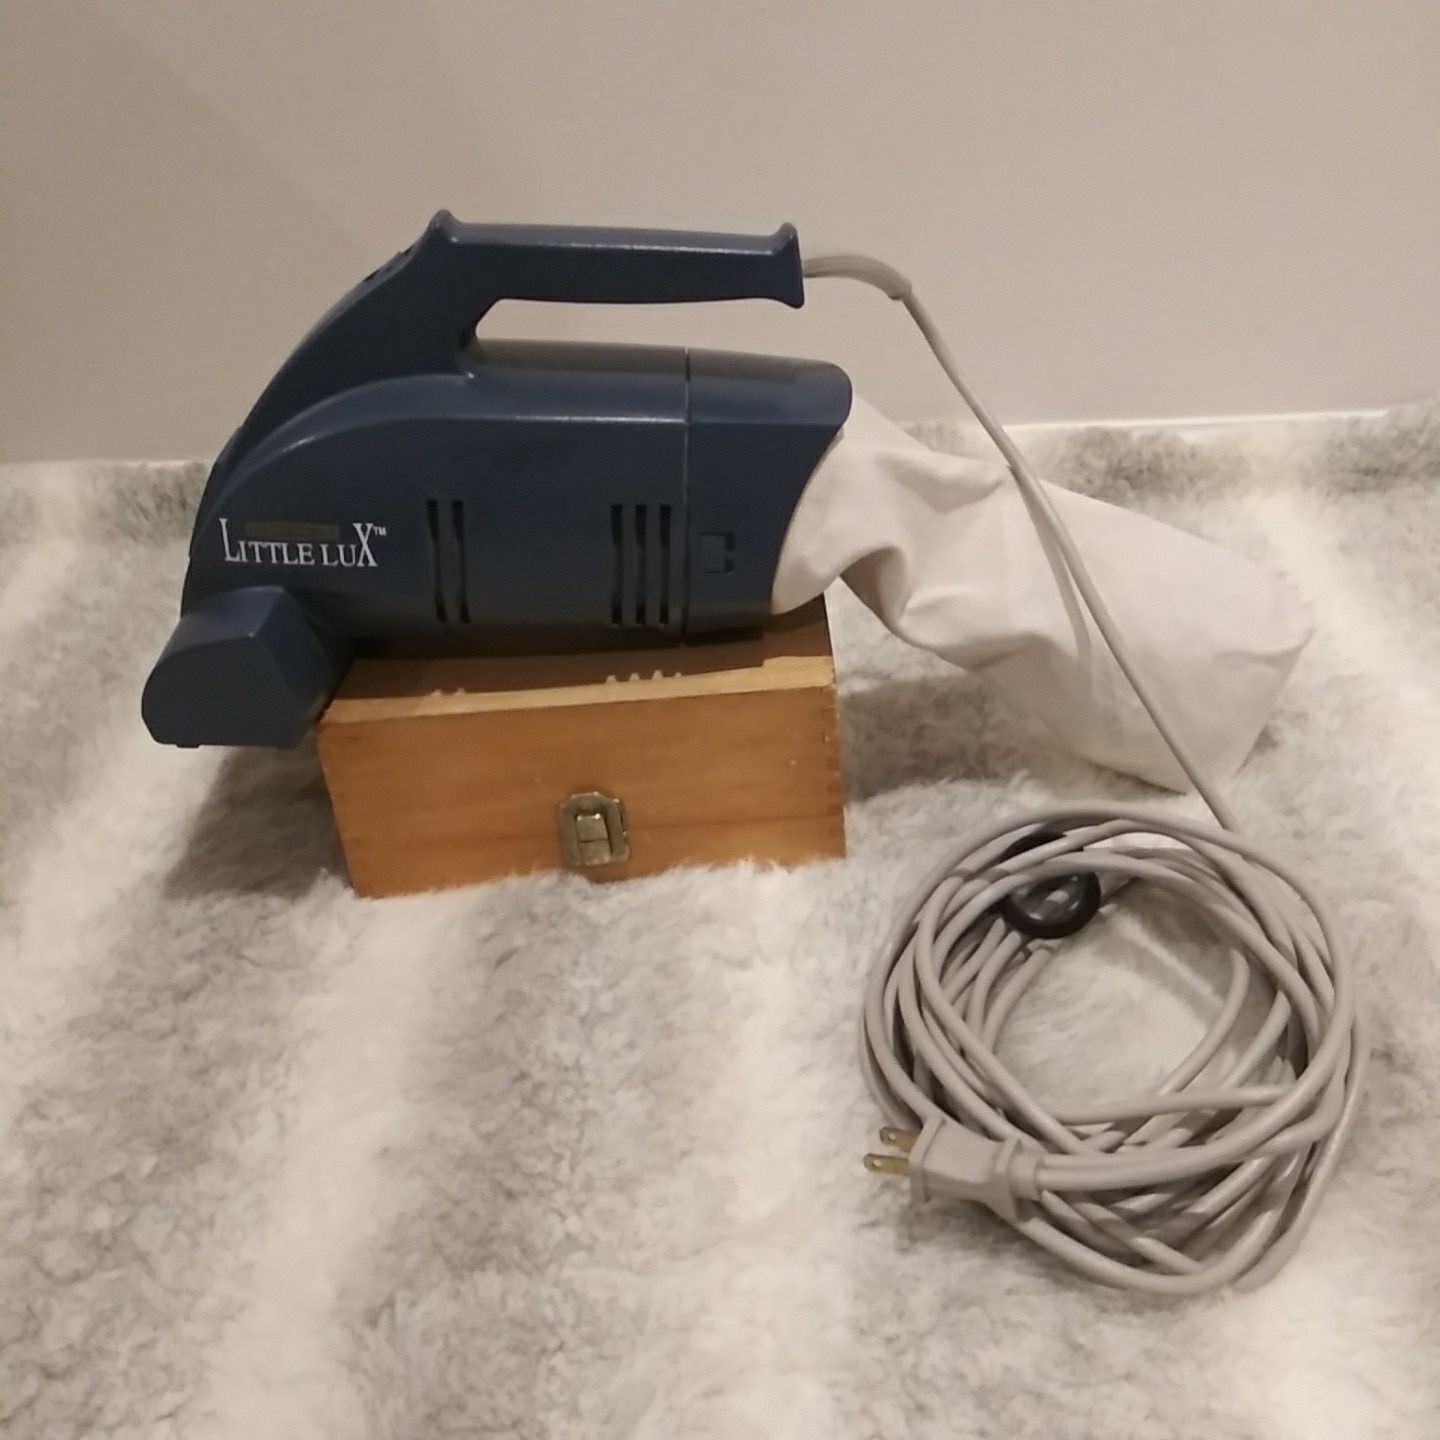 Electrolux Little Luxe handheld vacuum cleaner